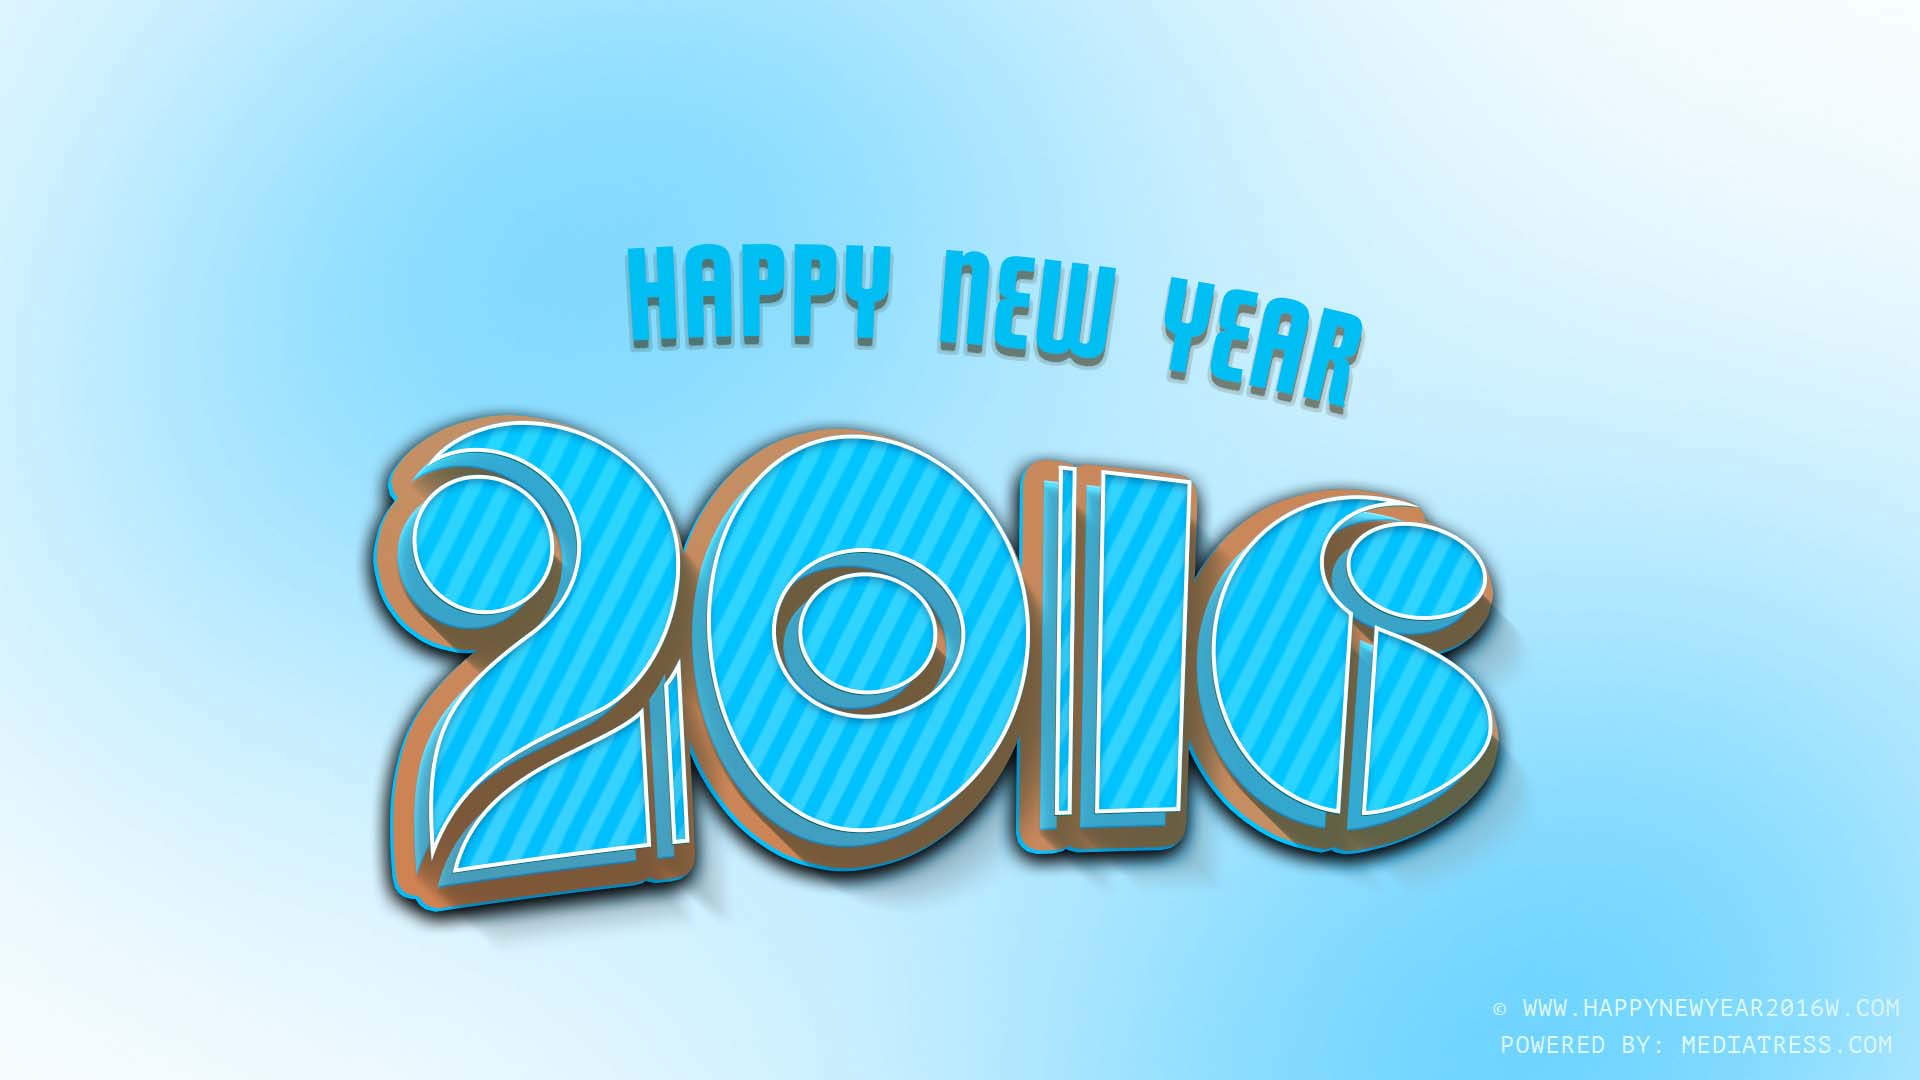 Beautiful Happy New Year Wallpapers HD (6)